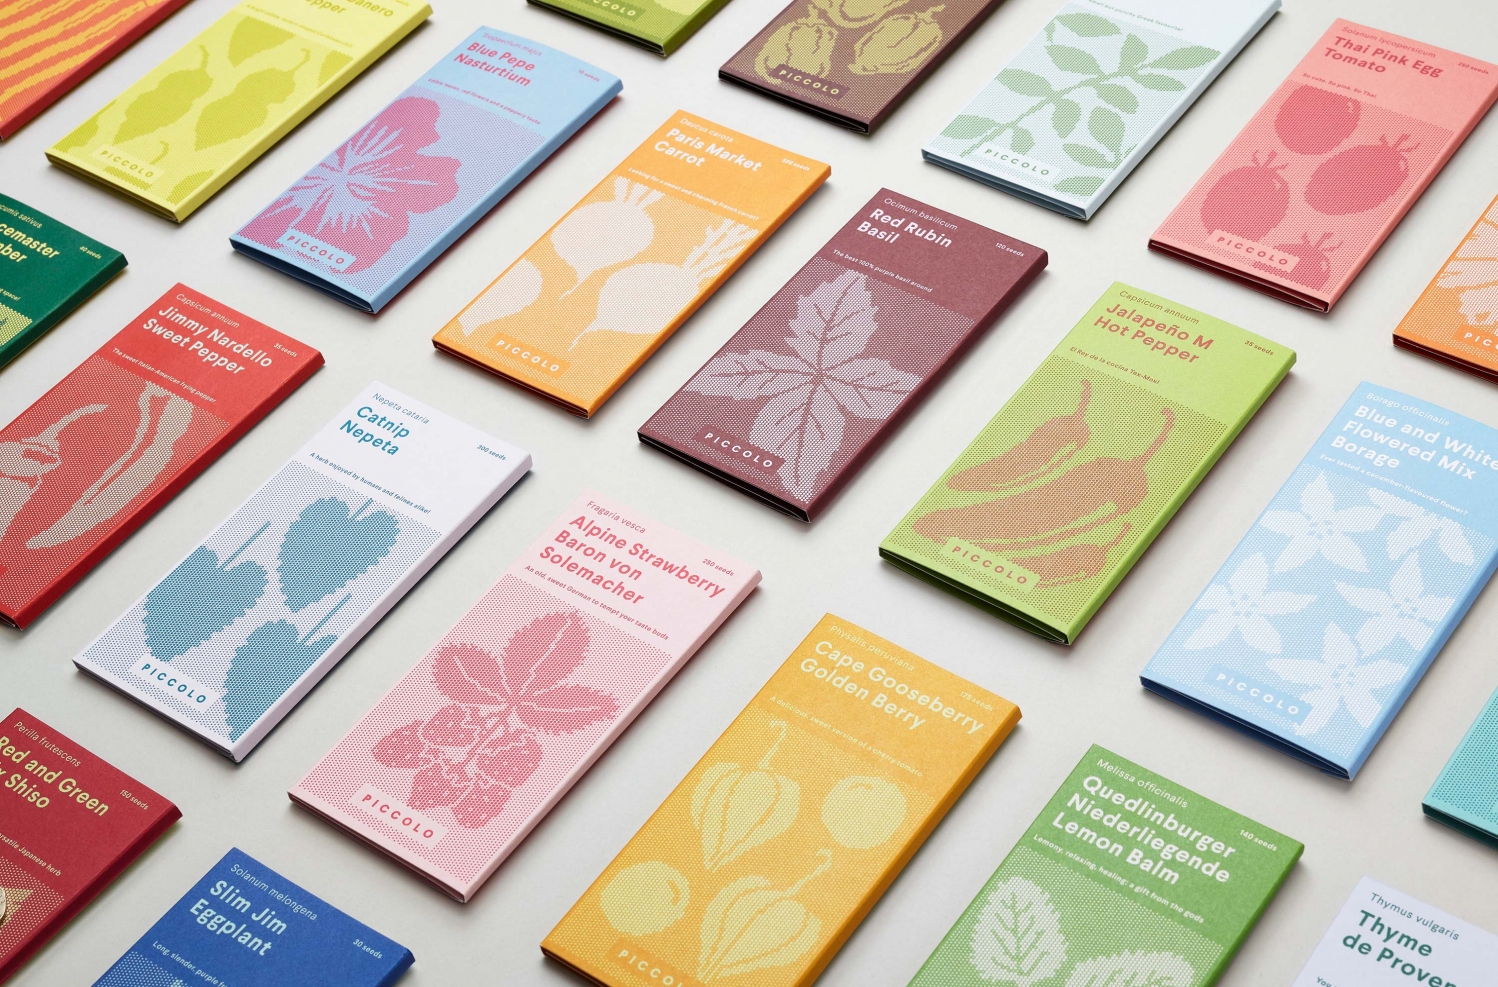 Graphic identity and packaging by Here Design for Italian seed brand Piccolo